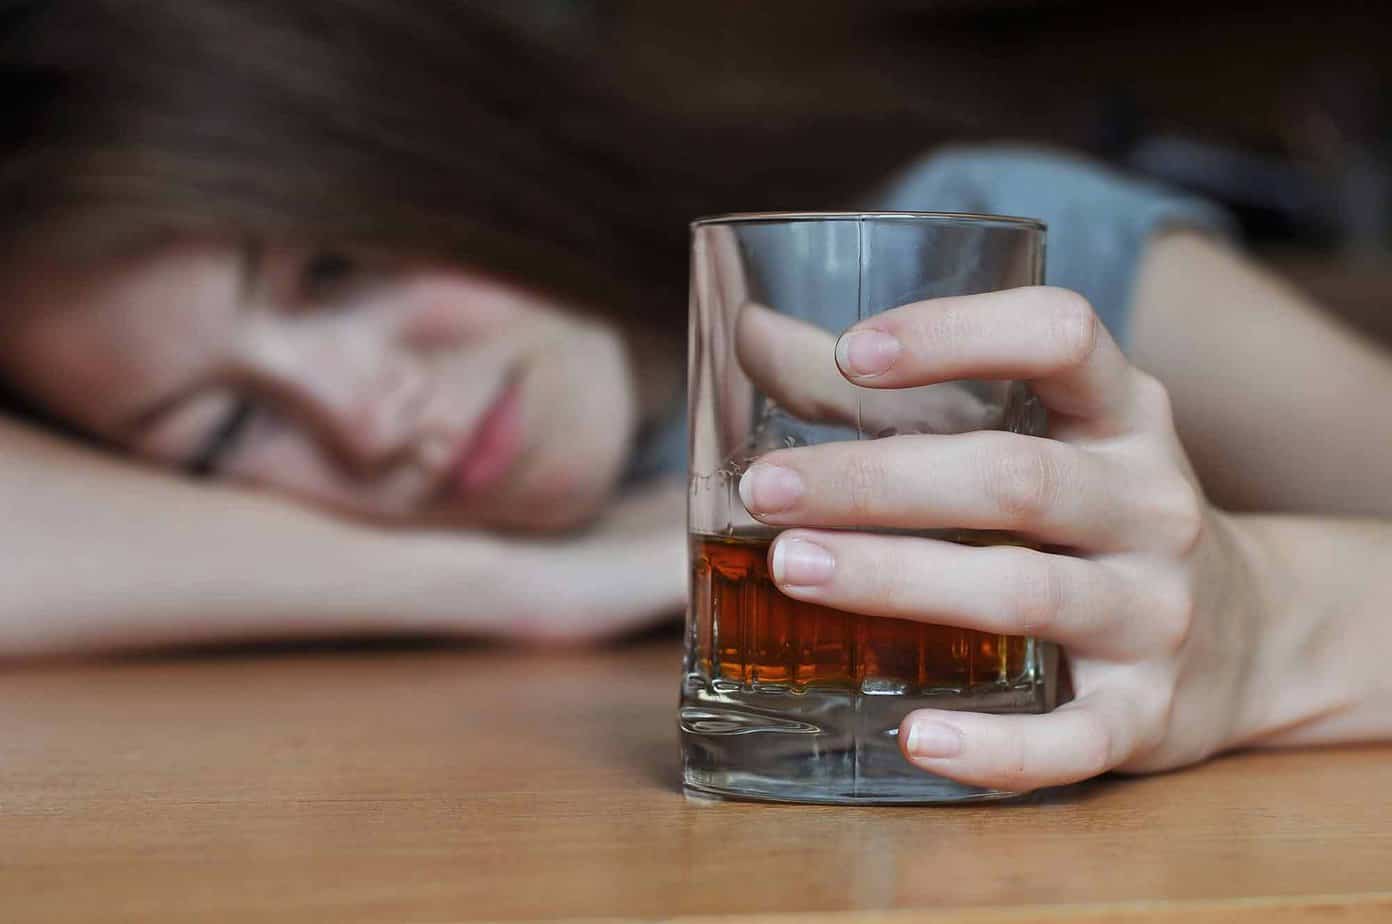 depressed woman lies on table clutching a glass containing liquor